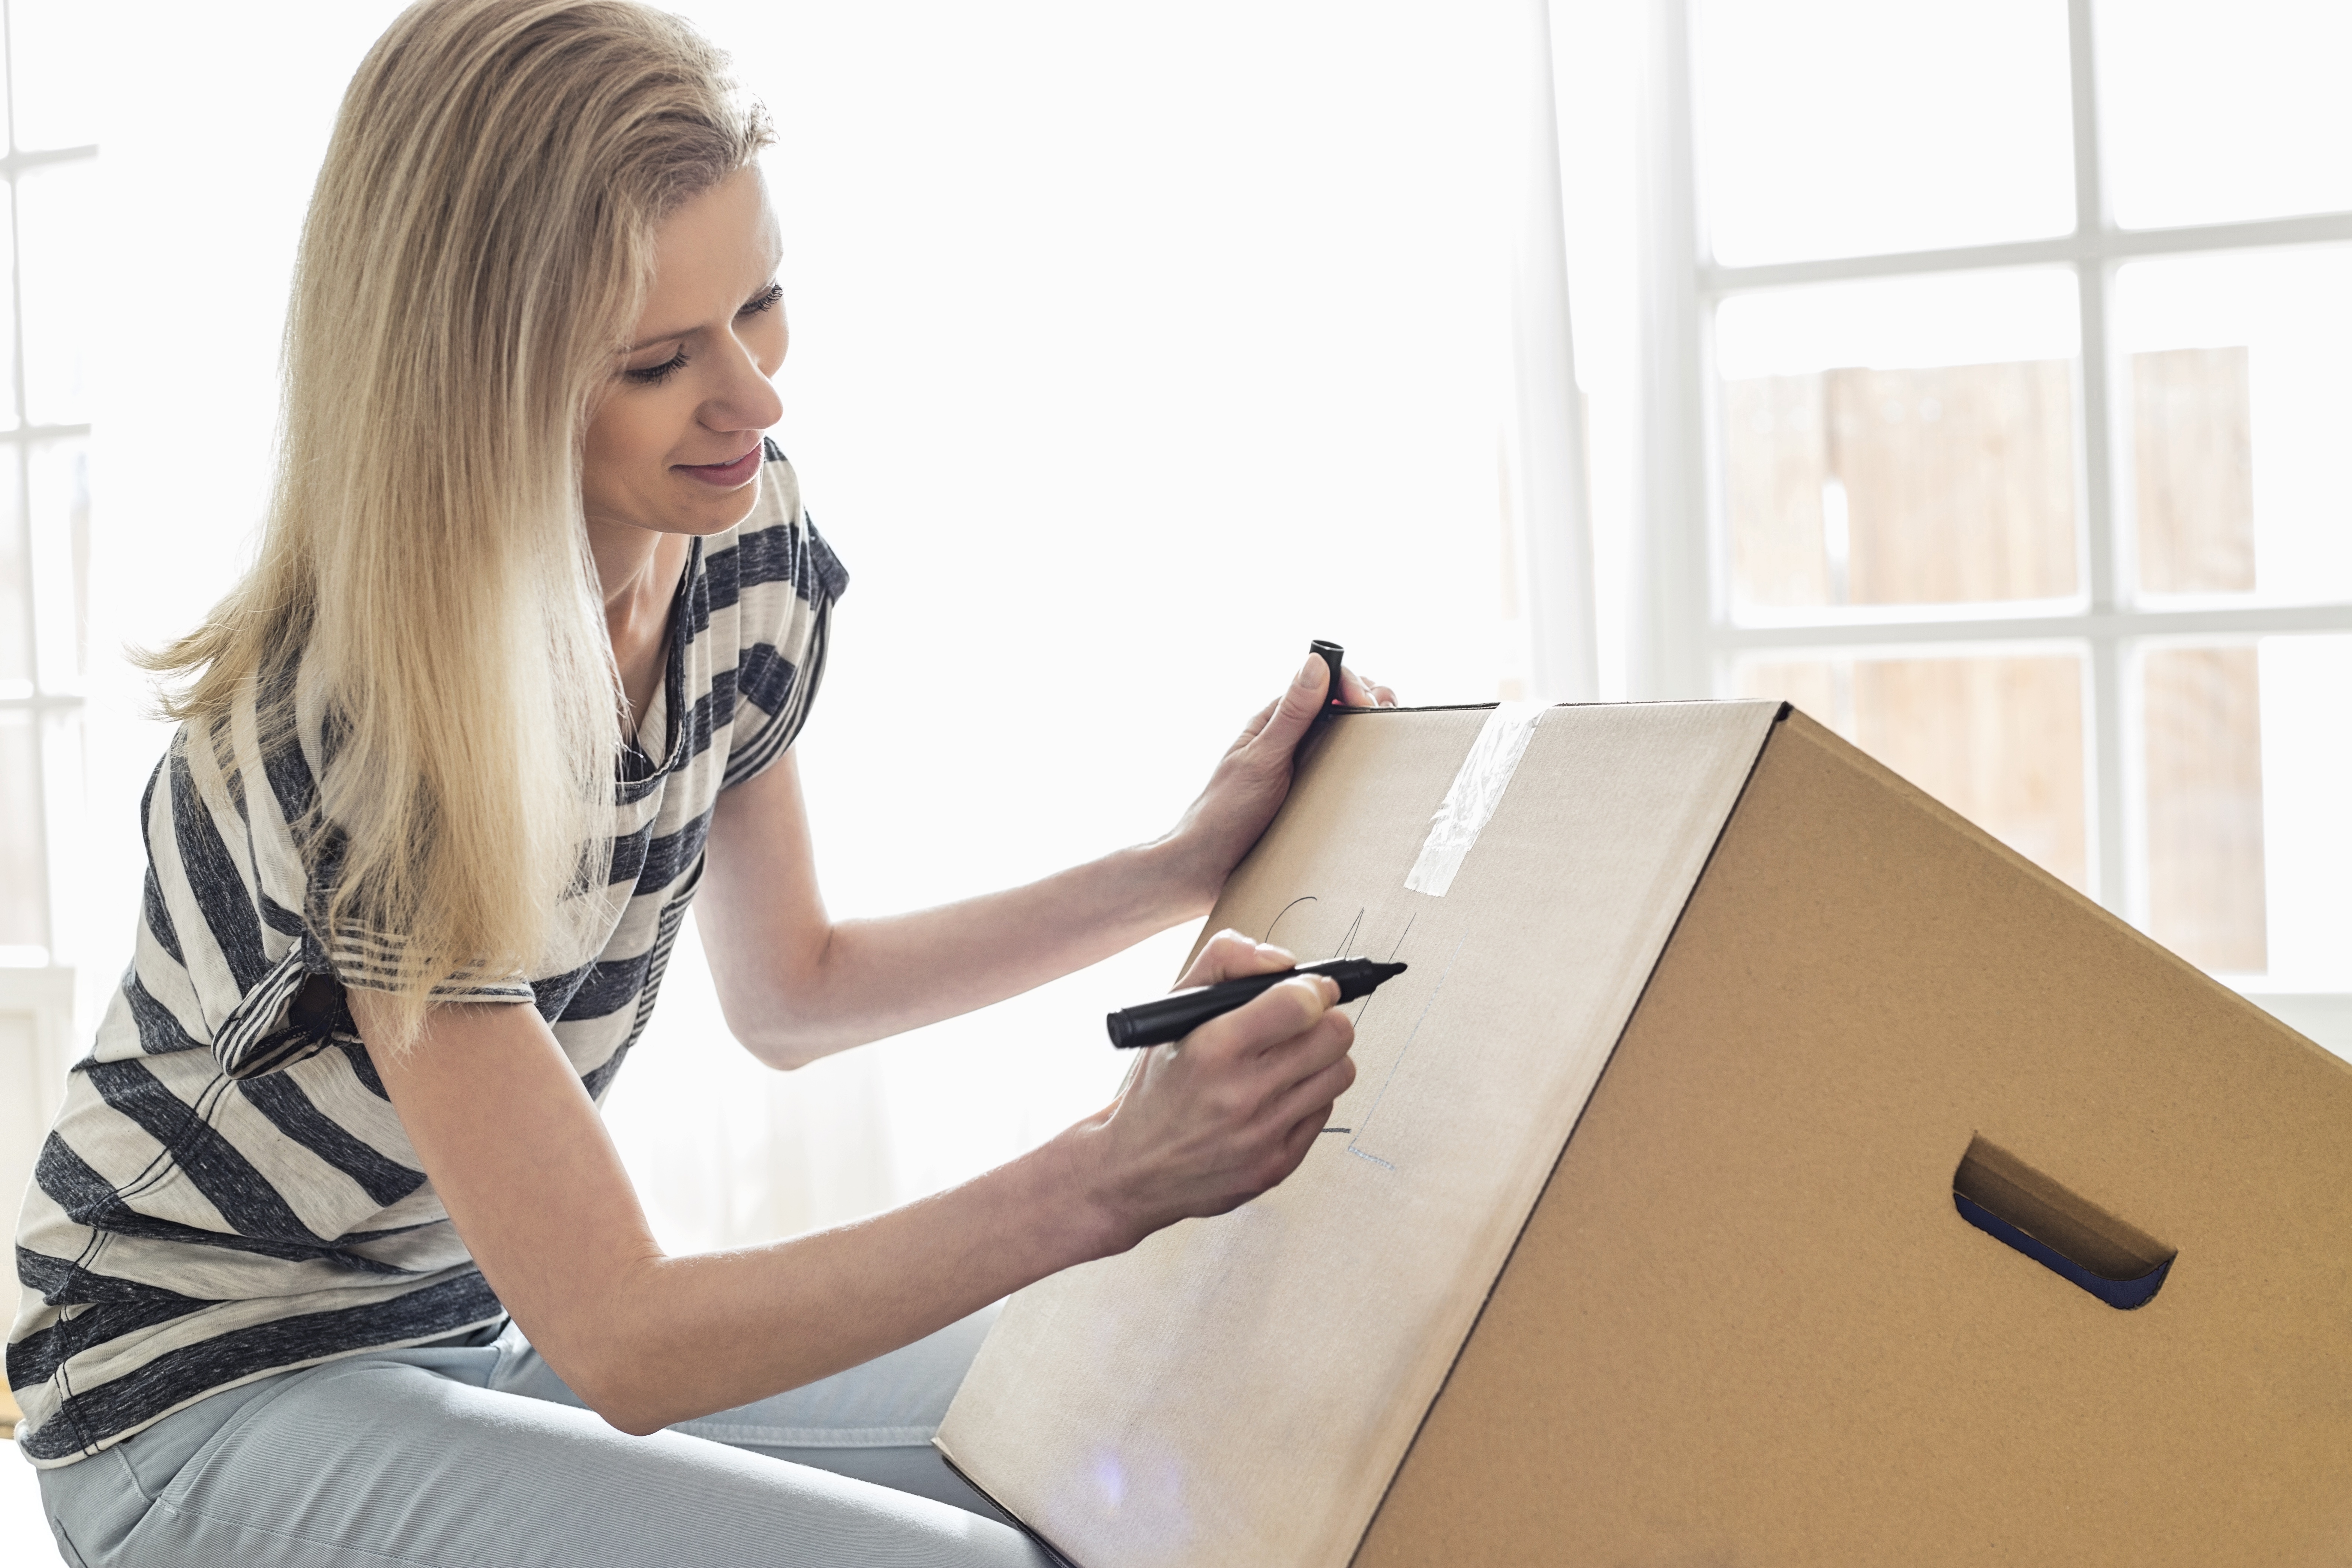 A woman labelling a box | Source: Shutterstock